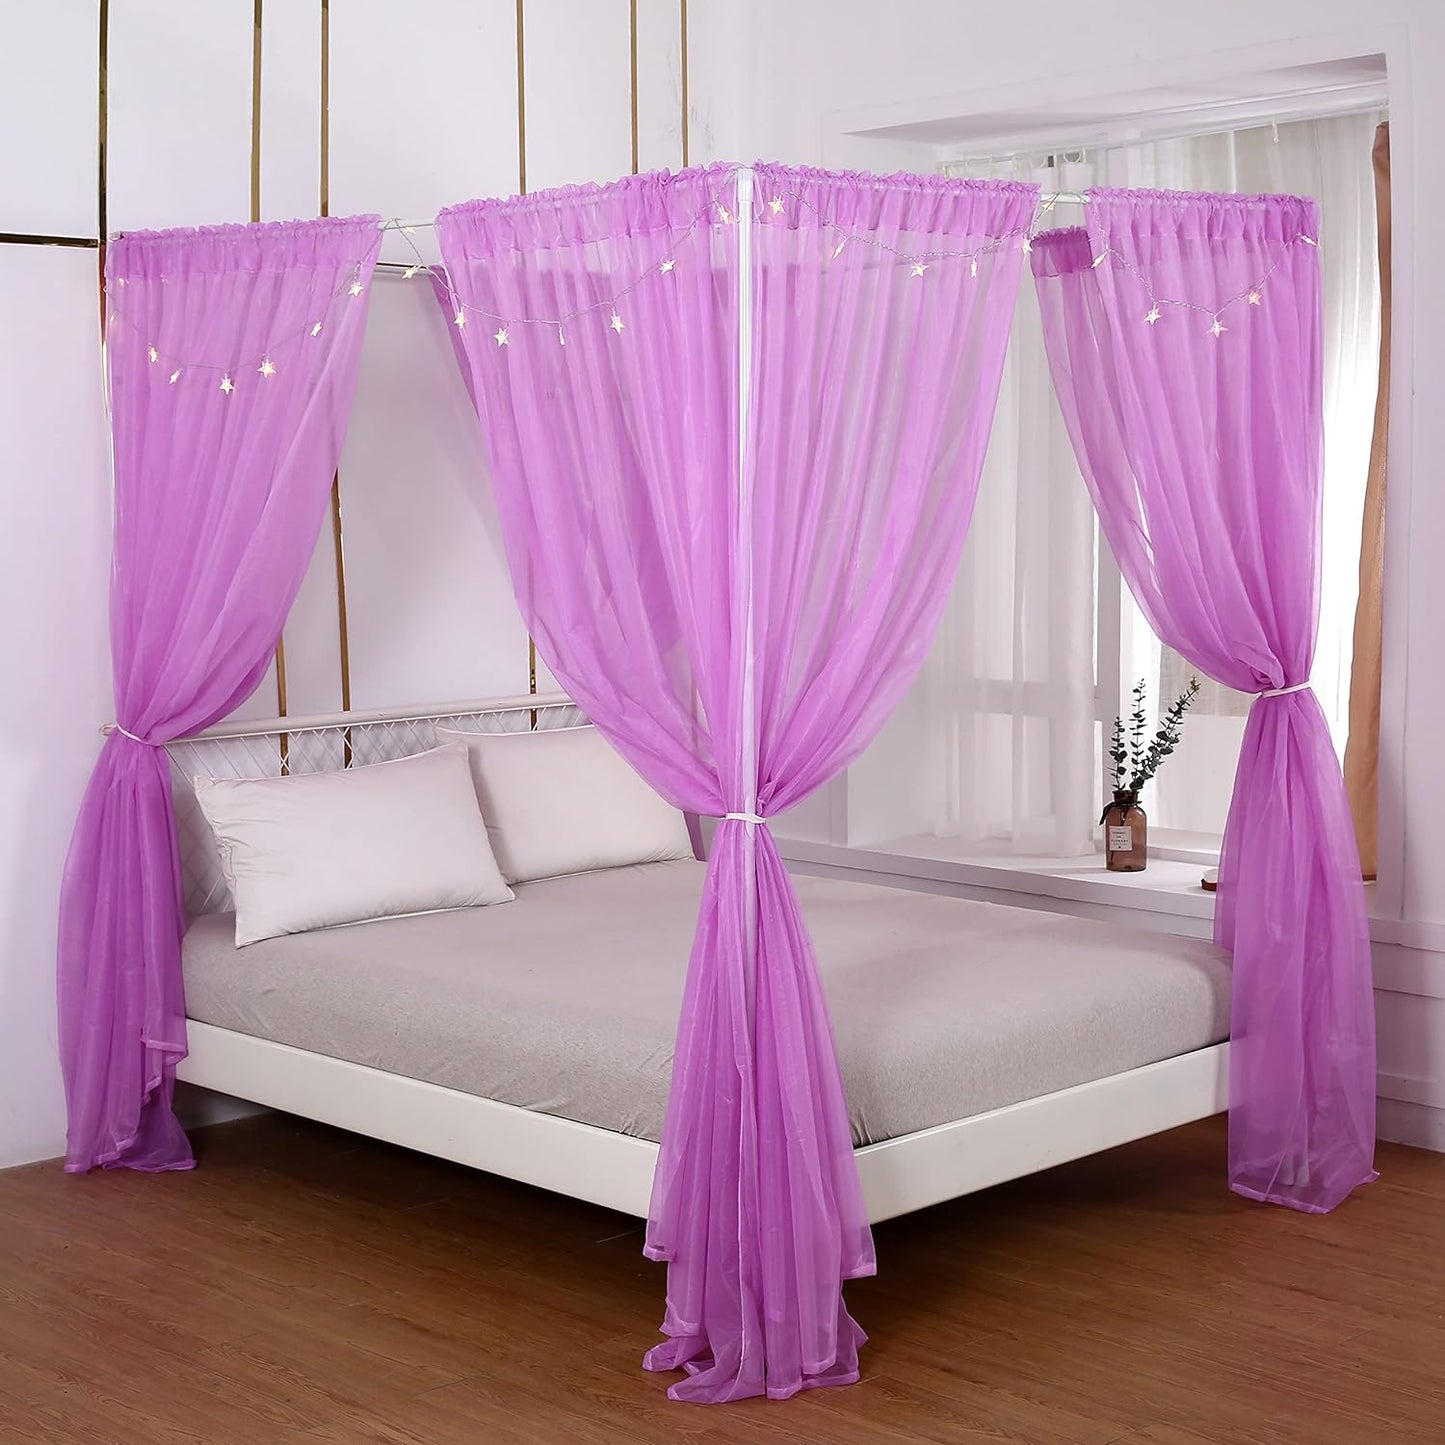 Akiky Princess Canopy Bed Curtains Bed Canopy Curtains with Lights for Queen Size Bed Drapes,8 Panels Canopies with 2 Lights,Room Décor (Full/Queen, White)  Akiky Purple Twin 